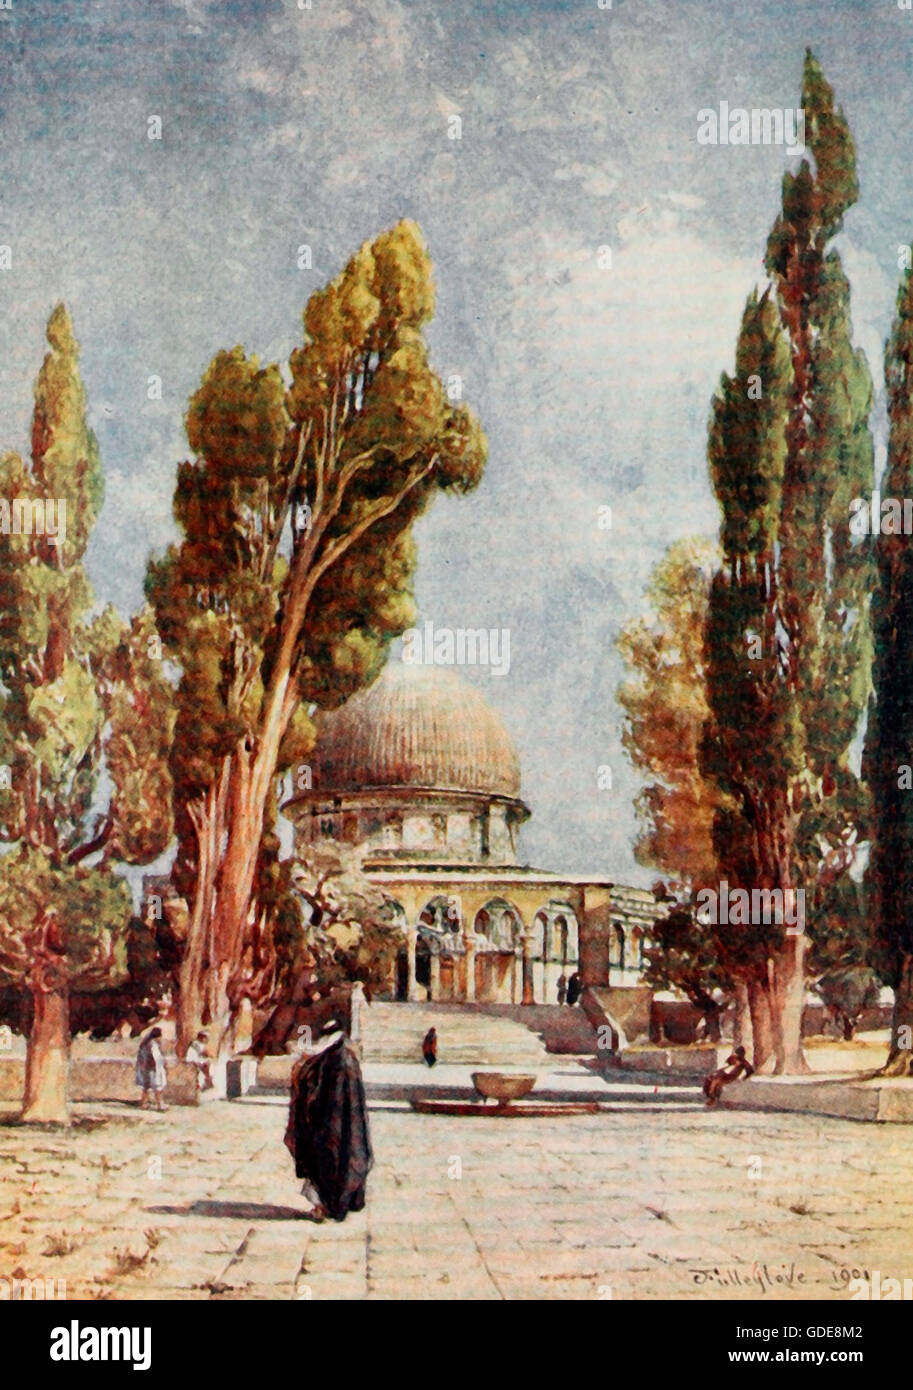 The Dome of the Rock (Mosque of Omar) as seen from the porch on the north side of the Mosque El Aksa. Holy Land, circa 1900 Stock Photo